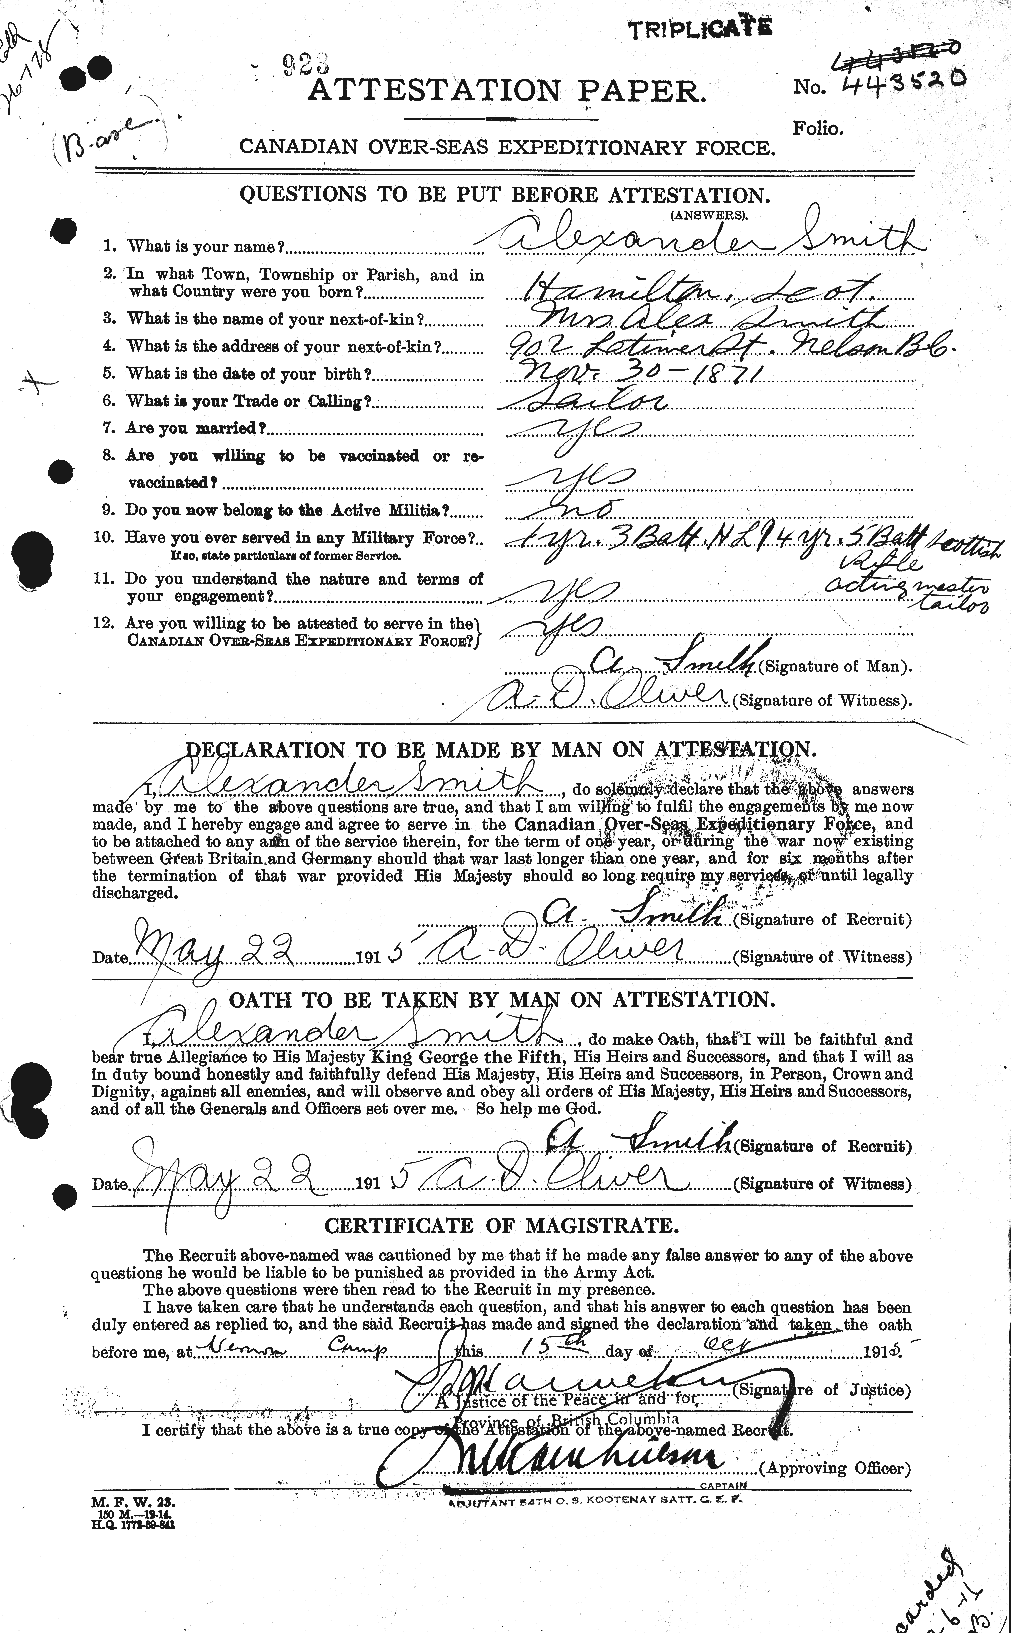 Personnel Records of the First World War - CEF 098456a